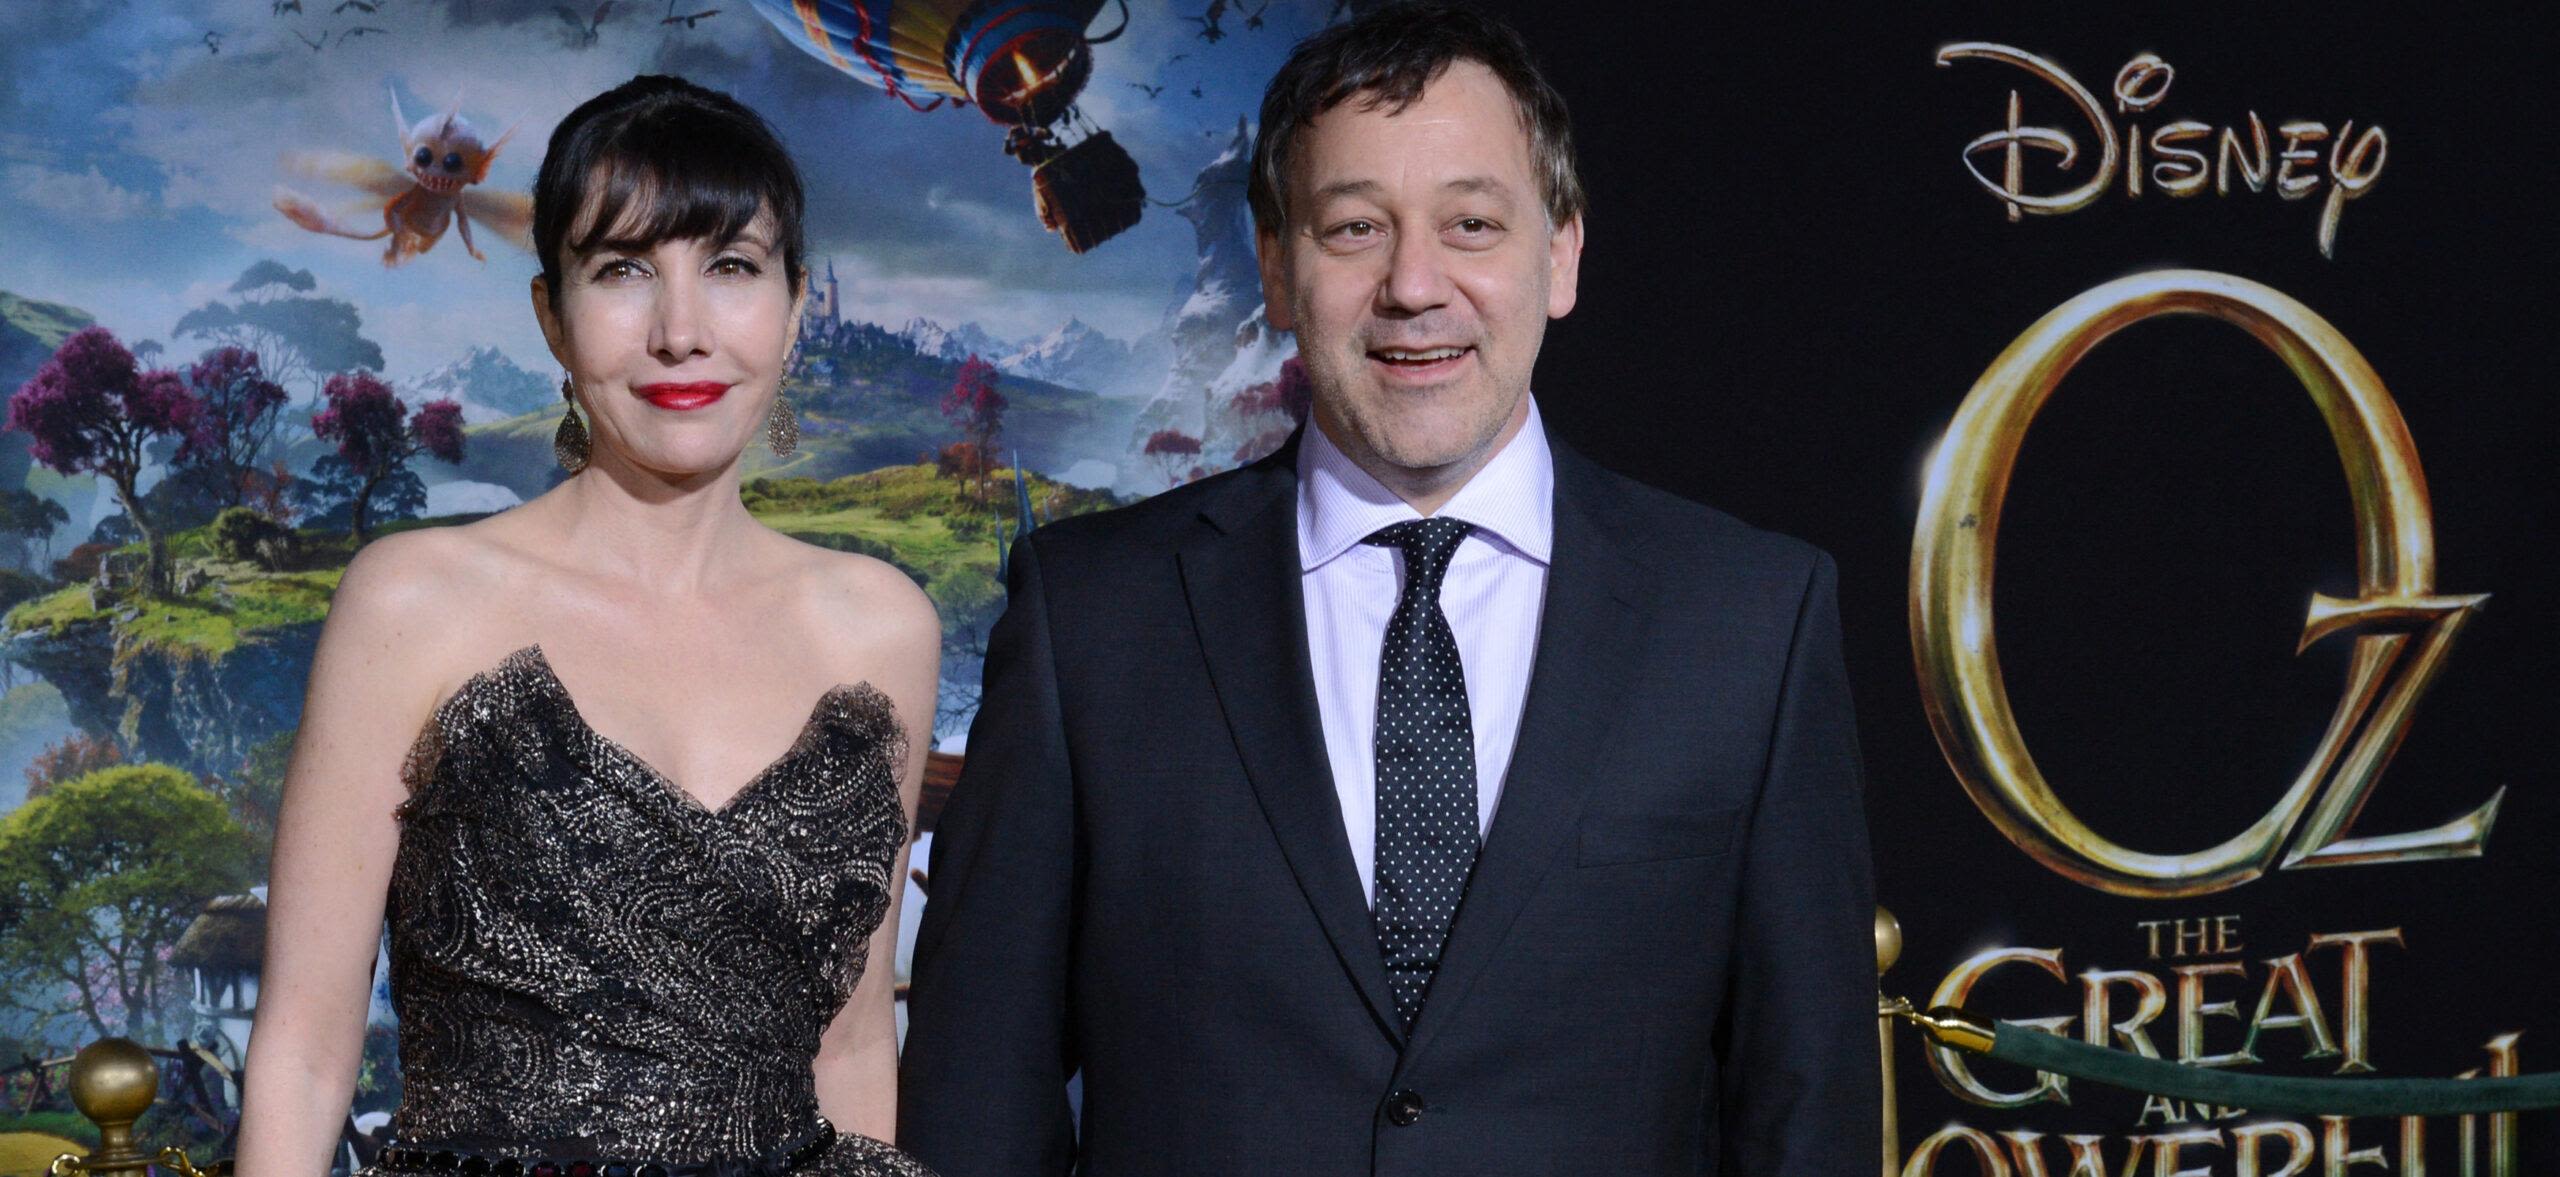 Director Sam Raimi's Wife Files For Divorce After 30 Years, Demands Spousal Support